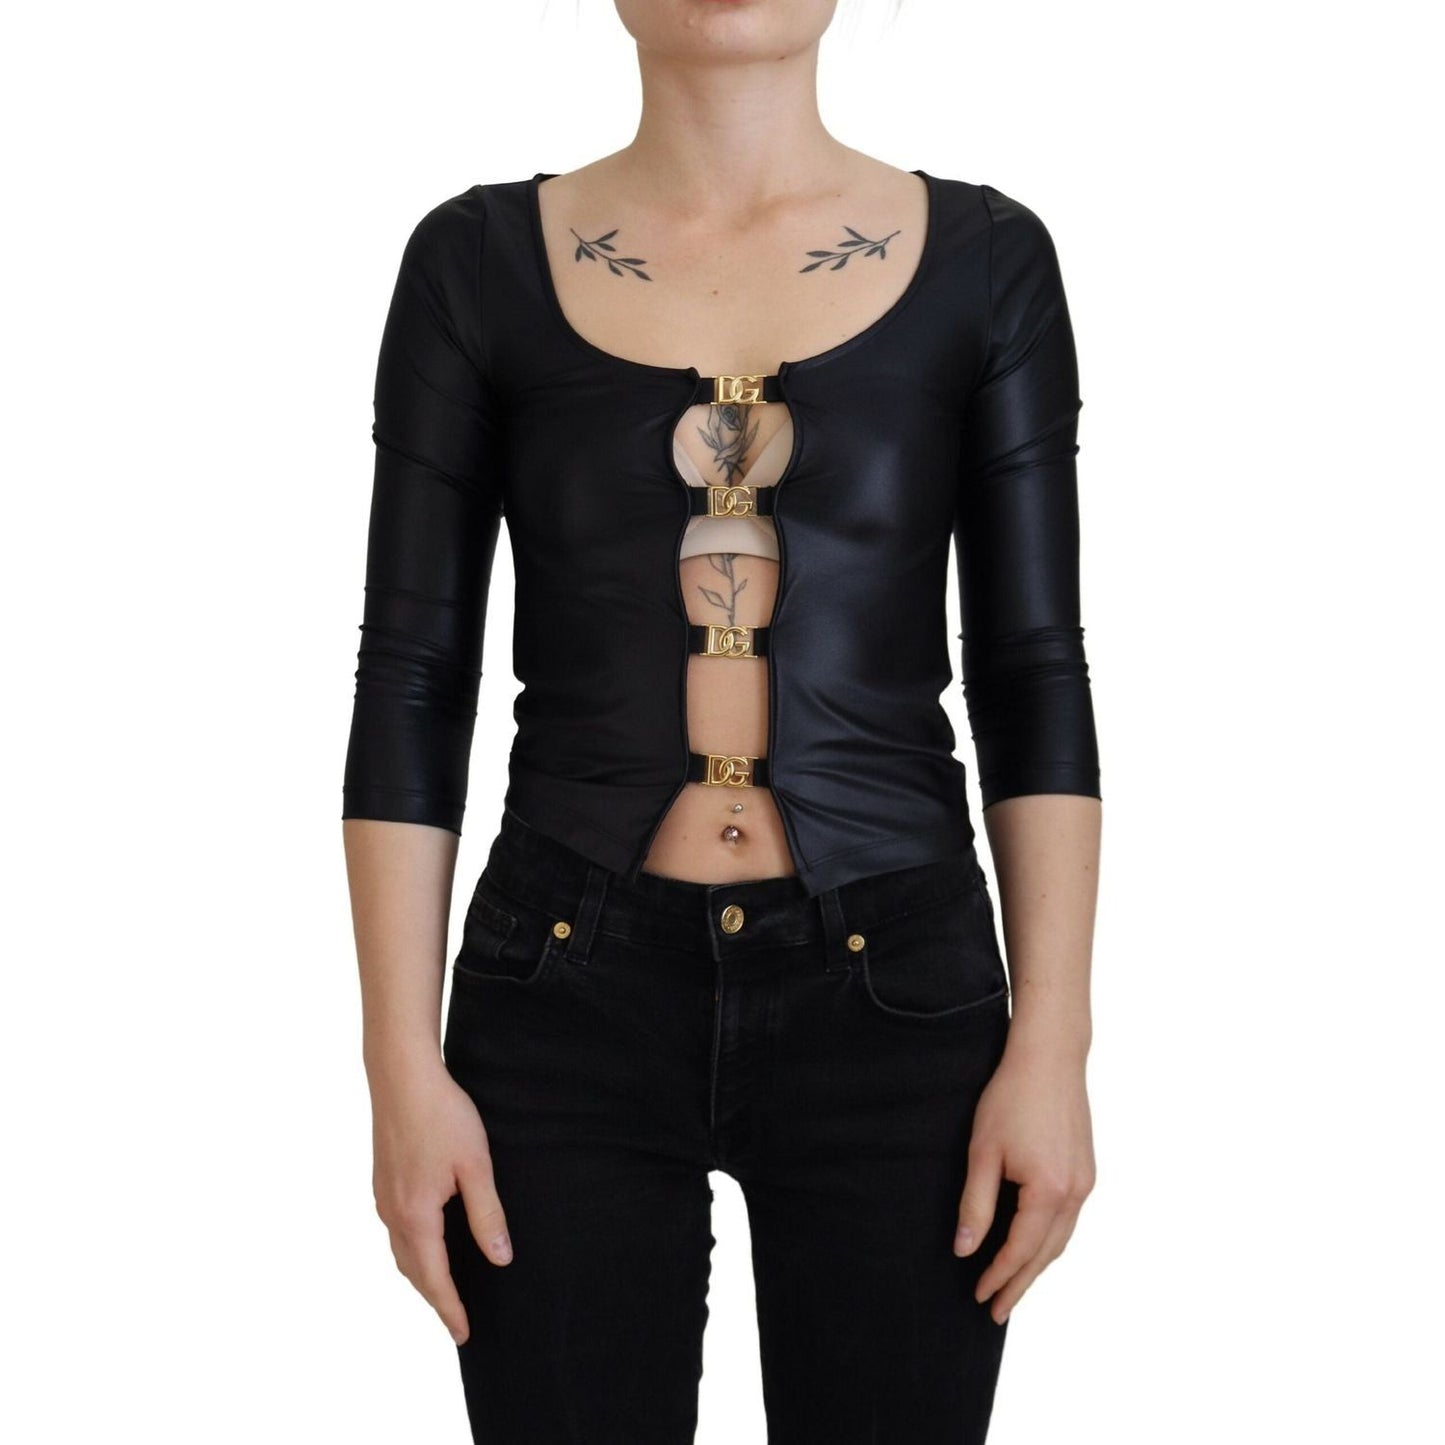 Dolce & Gabbana Elegant Black 3/4 Sleeve Top with Gold Detailing black-cotton-stretch-open-chest-3-4-sleeve-top